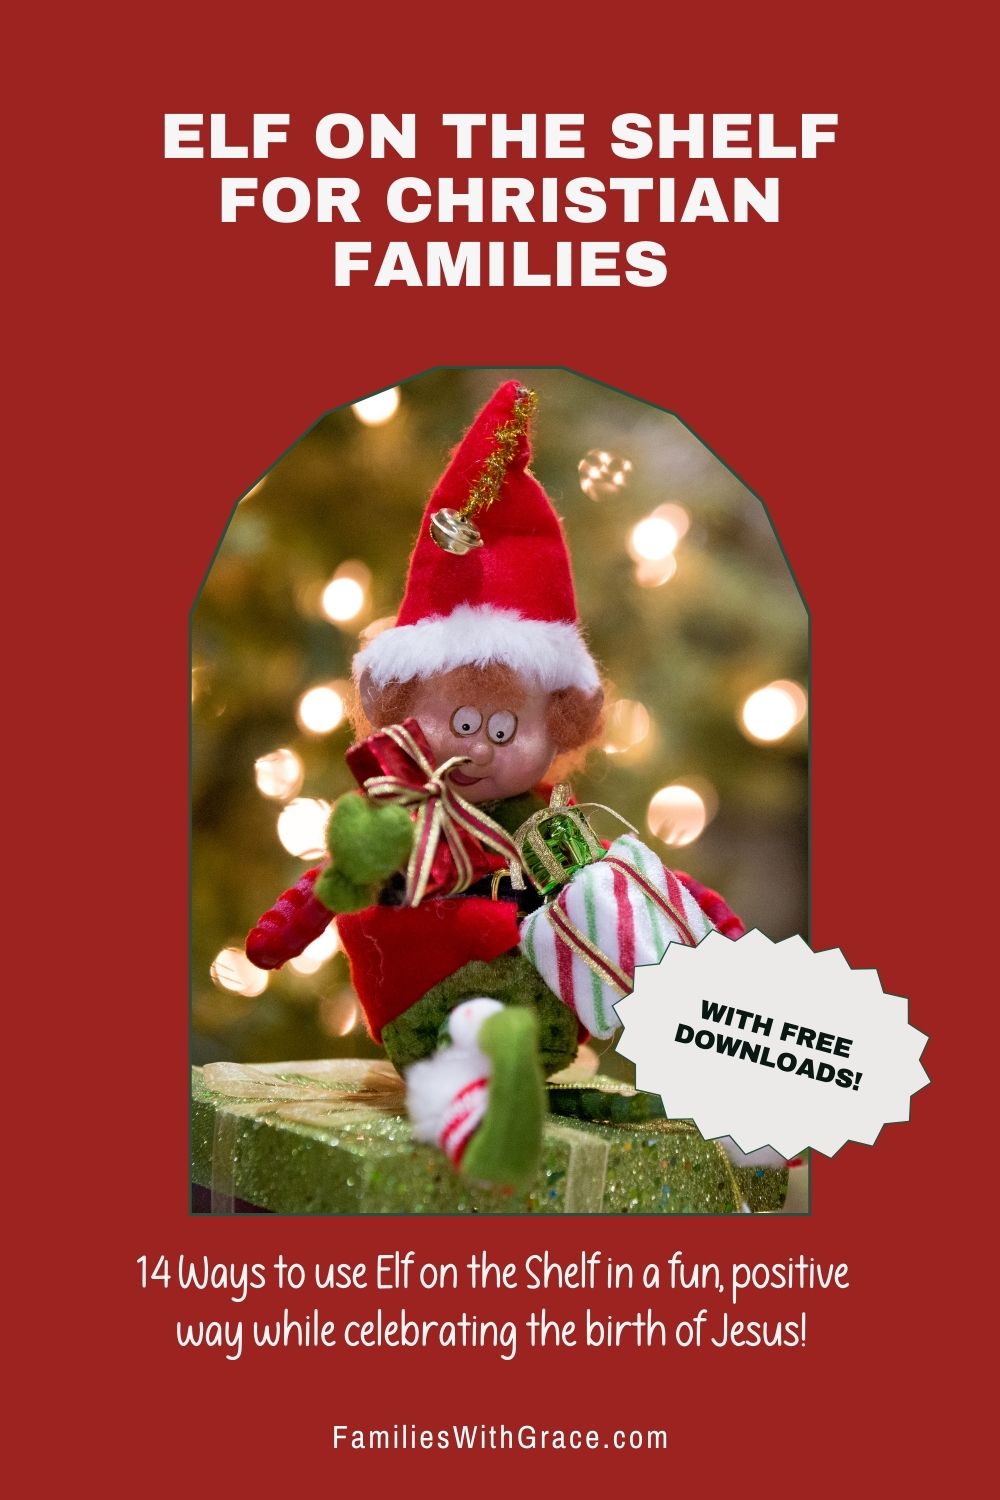 Free Printable Elf on the Shelf Letters with Elf Ideas